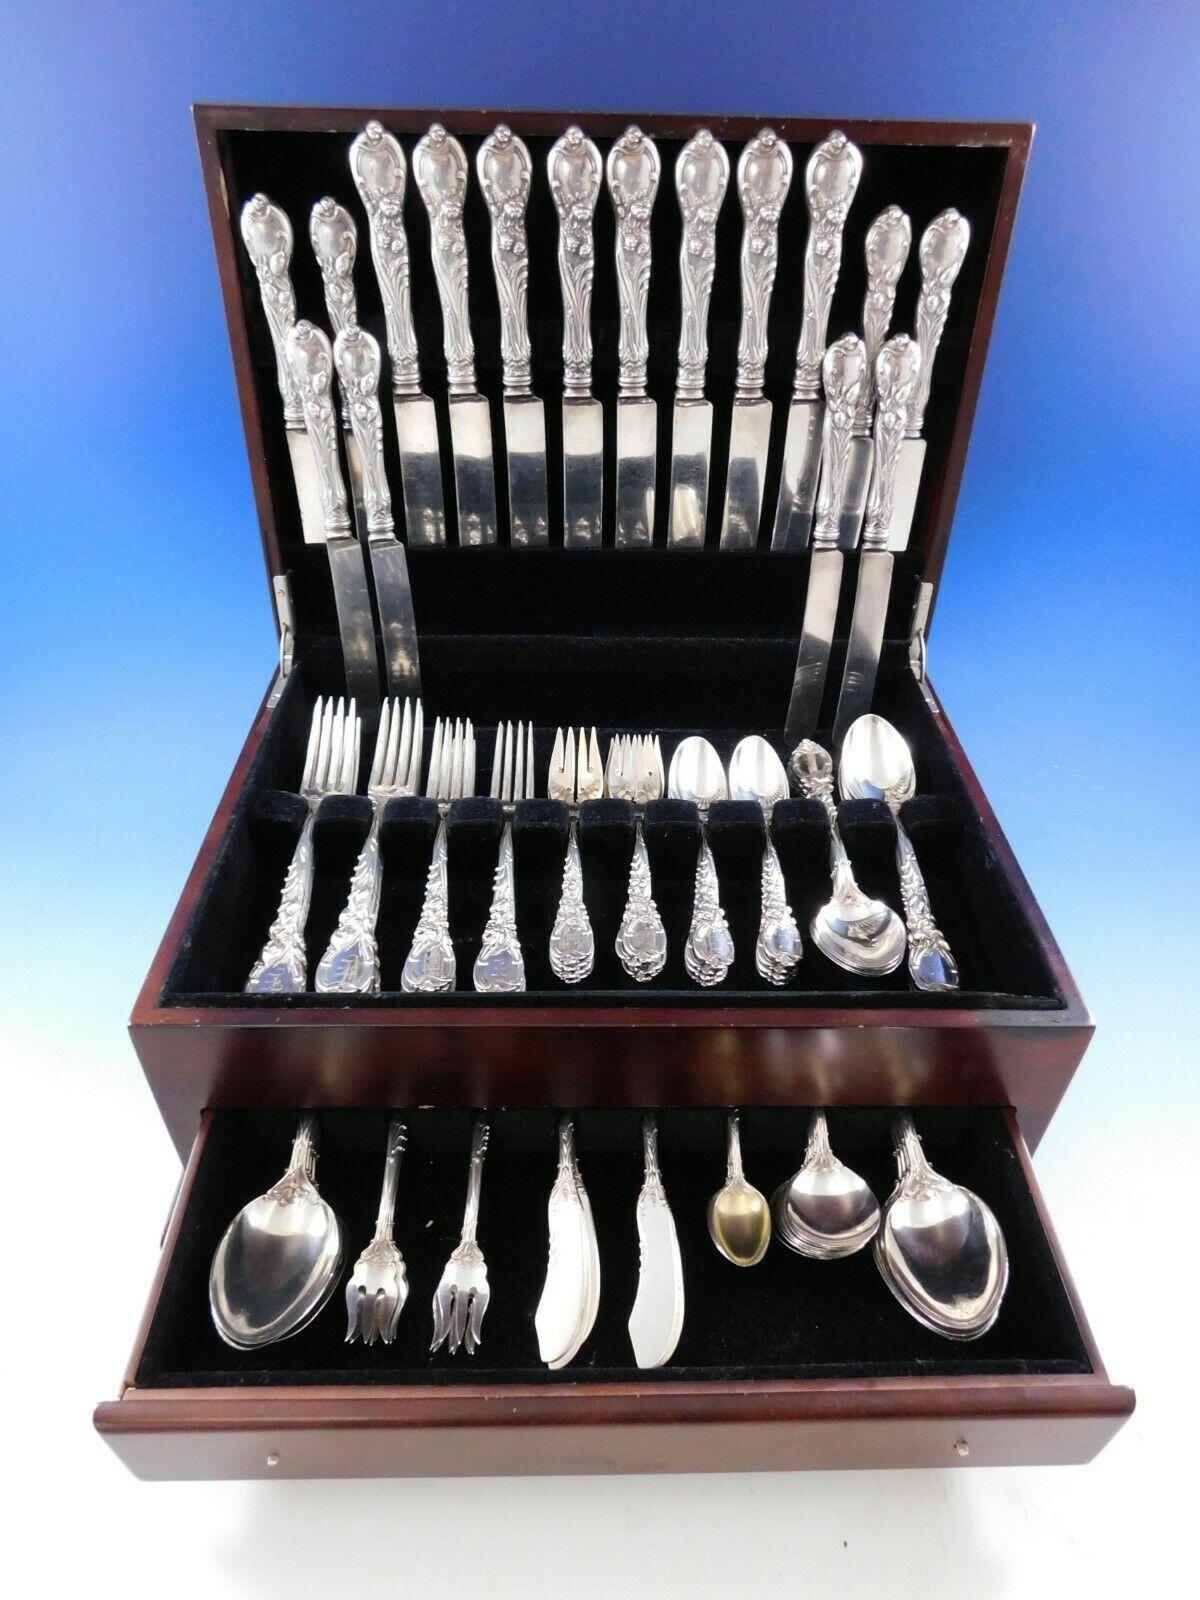 La Parisienne by Reed and Barton sterling silver dinner size flatware set, 96 pieces. This Art Nouveau, multi-motif, floral pattern is circa 1902. This set includes:

8 large dinner size knives, 10 1/4